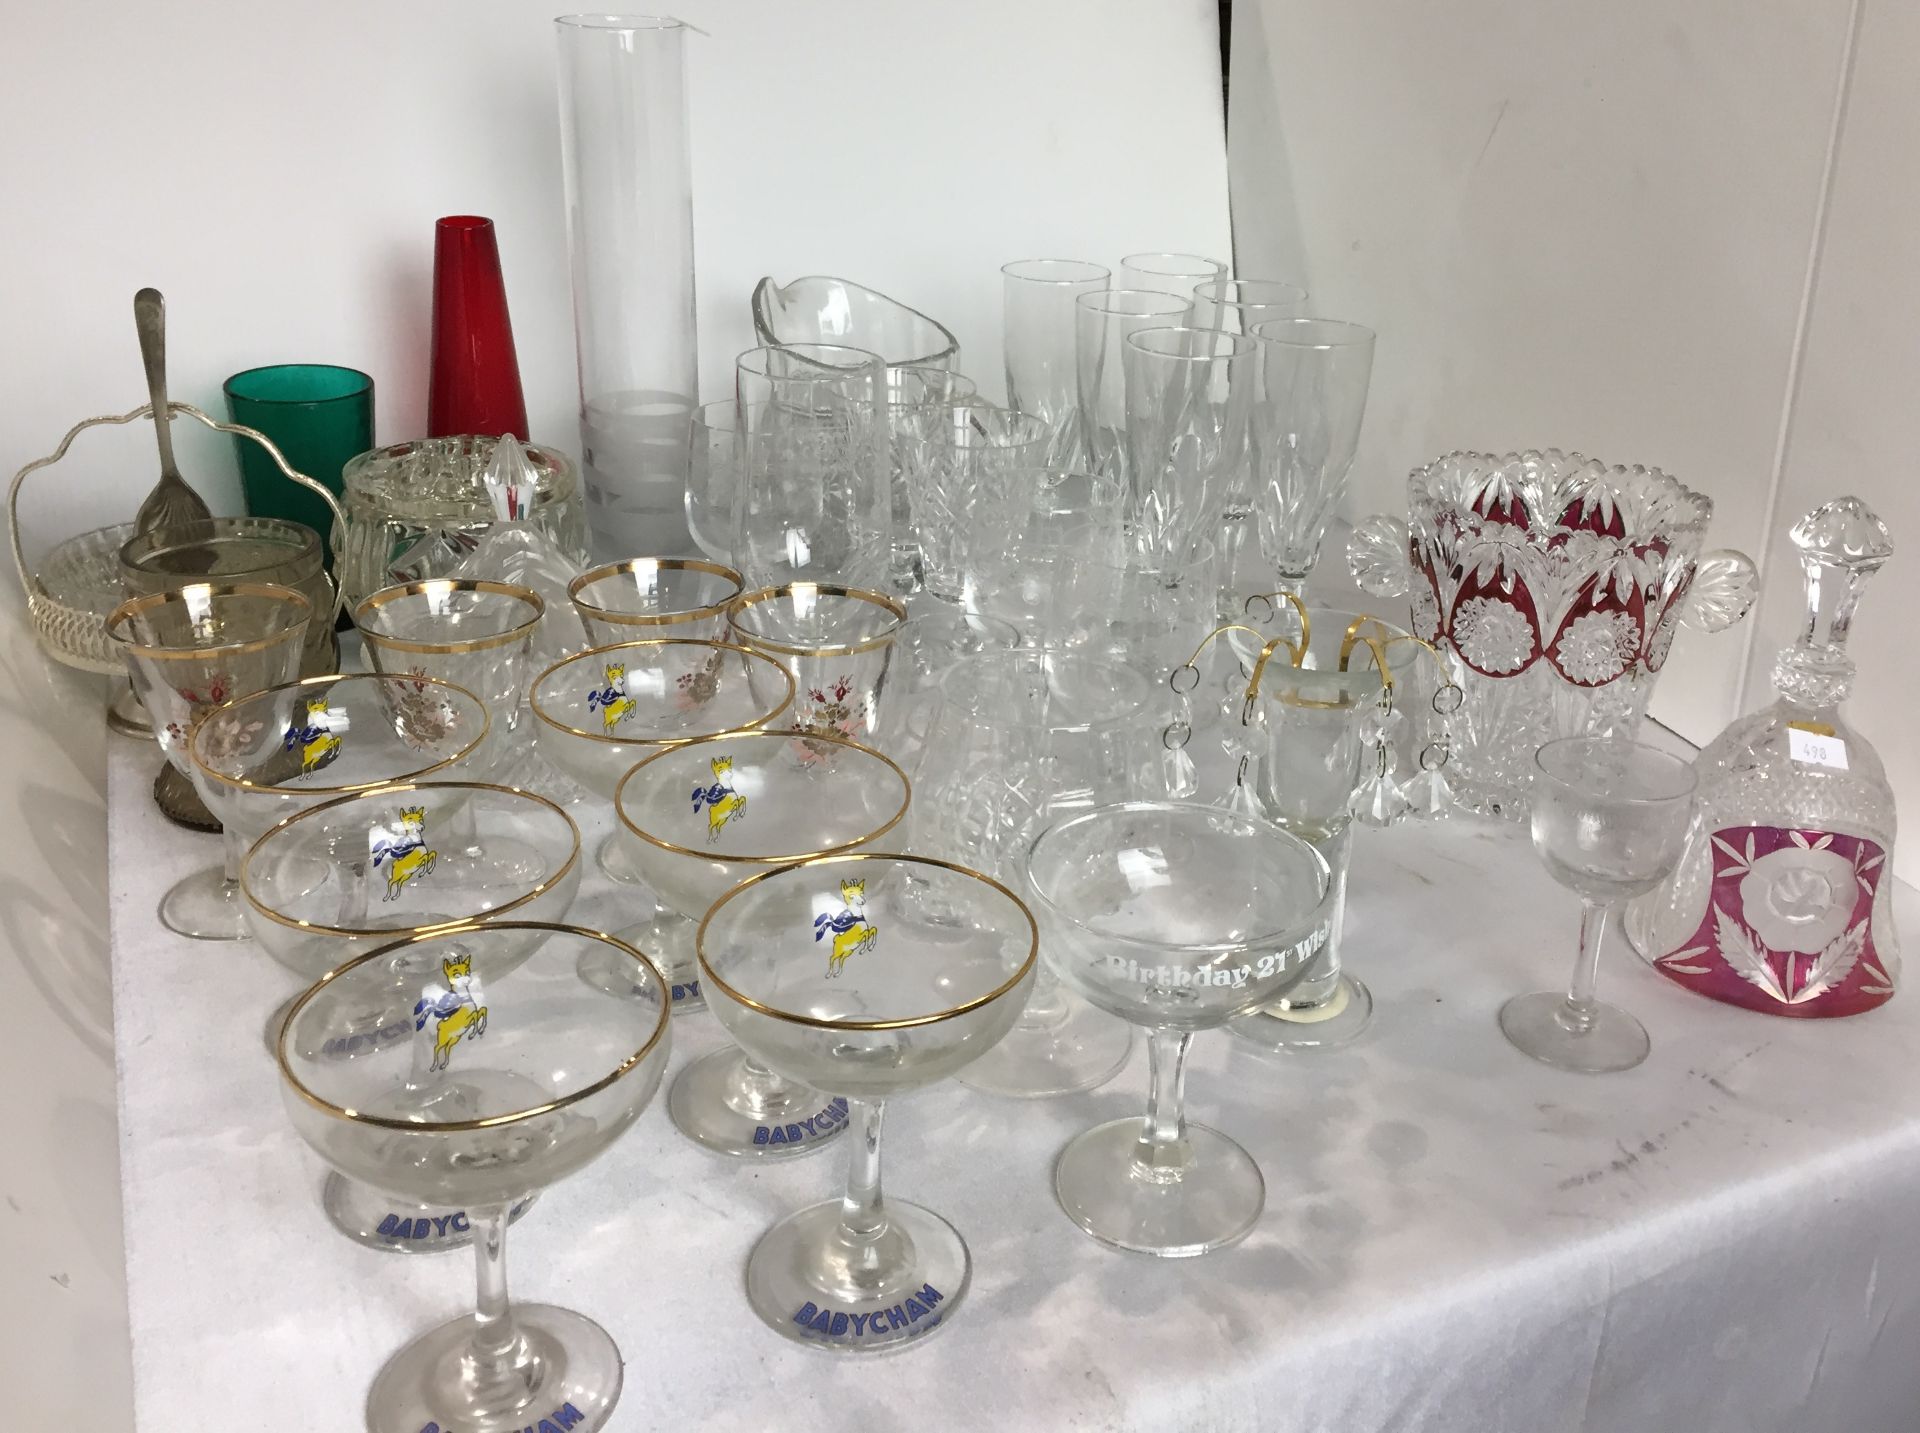 30+ pieces of glass including set of 6 Babycham glasses, cut glass cranberry trimmed ice bucket,